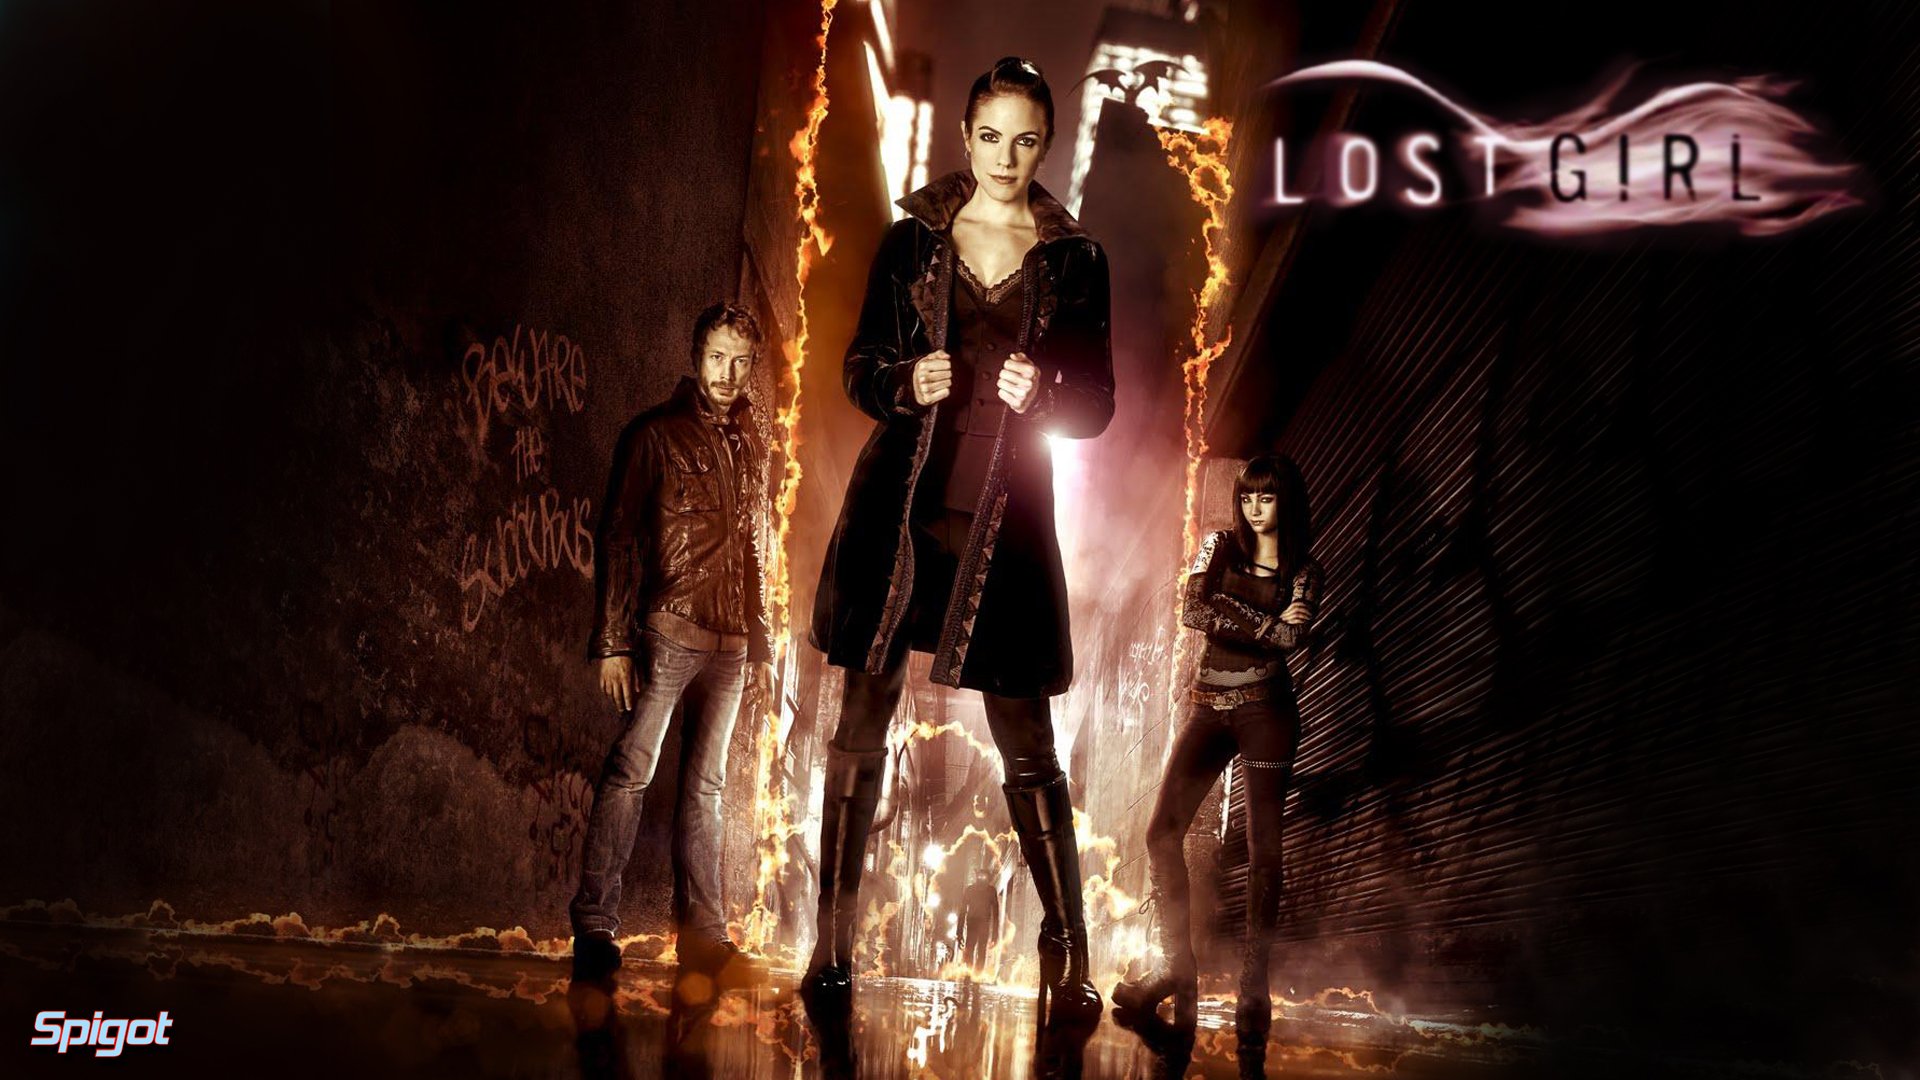 Lost Girl Wallpapers and Background Images   stmednet